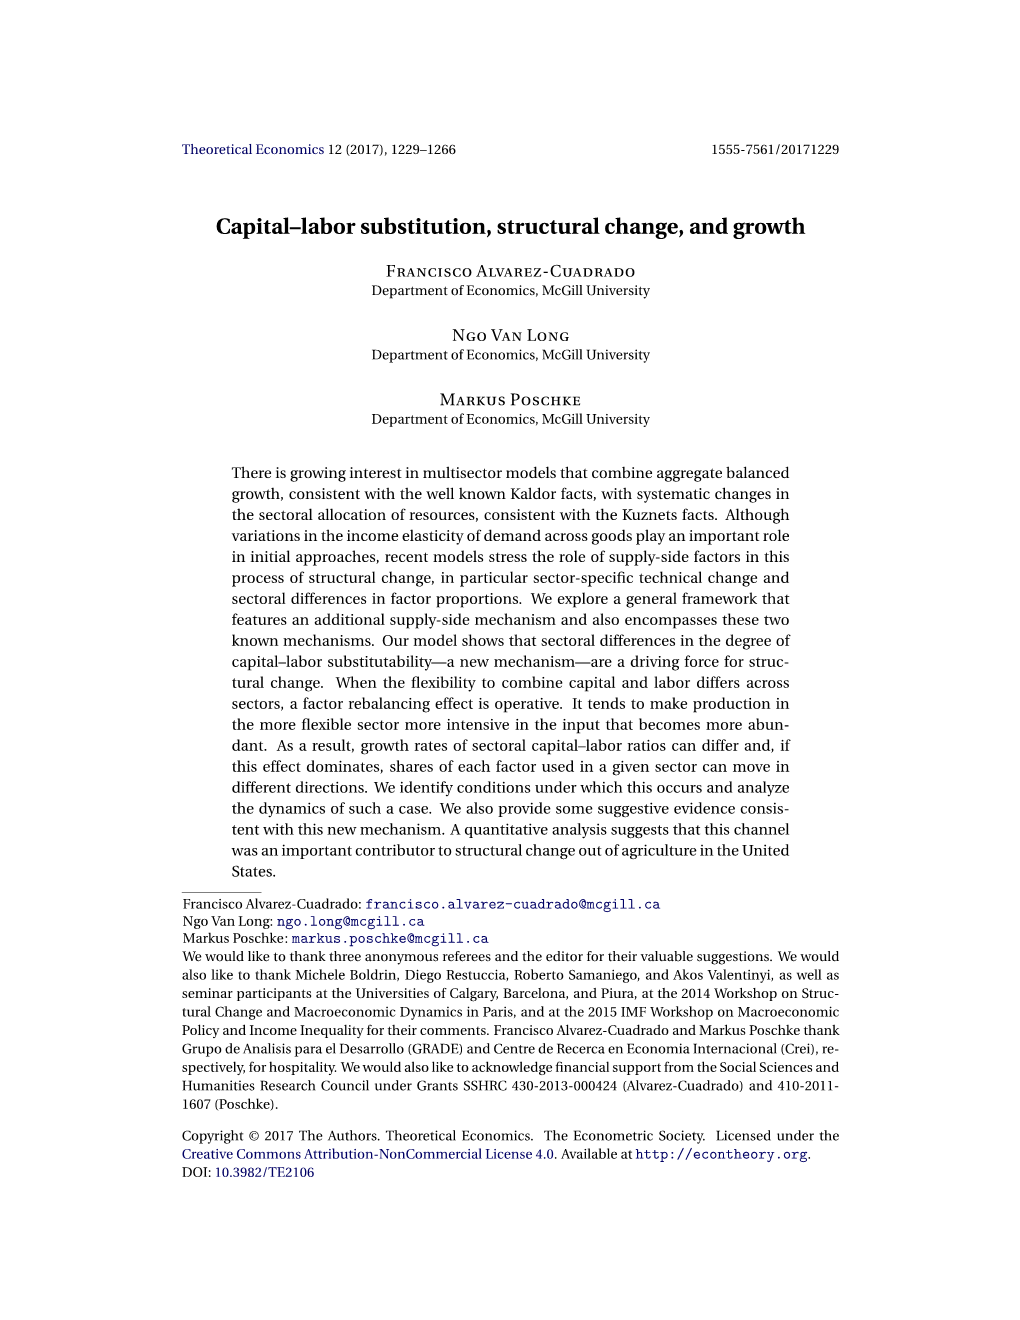 Capital-Labor Substitution, Structural Change, and Growth